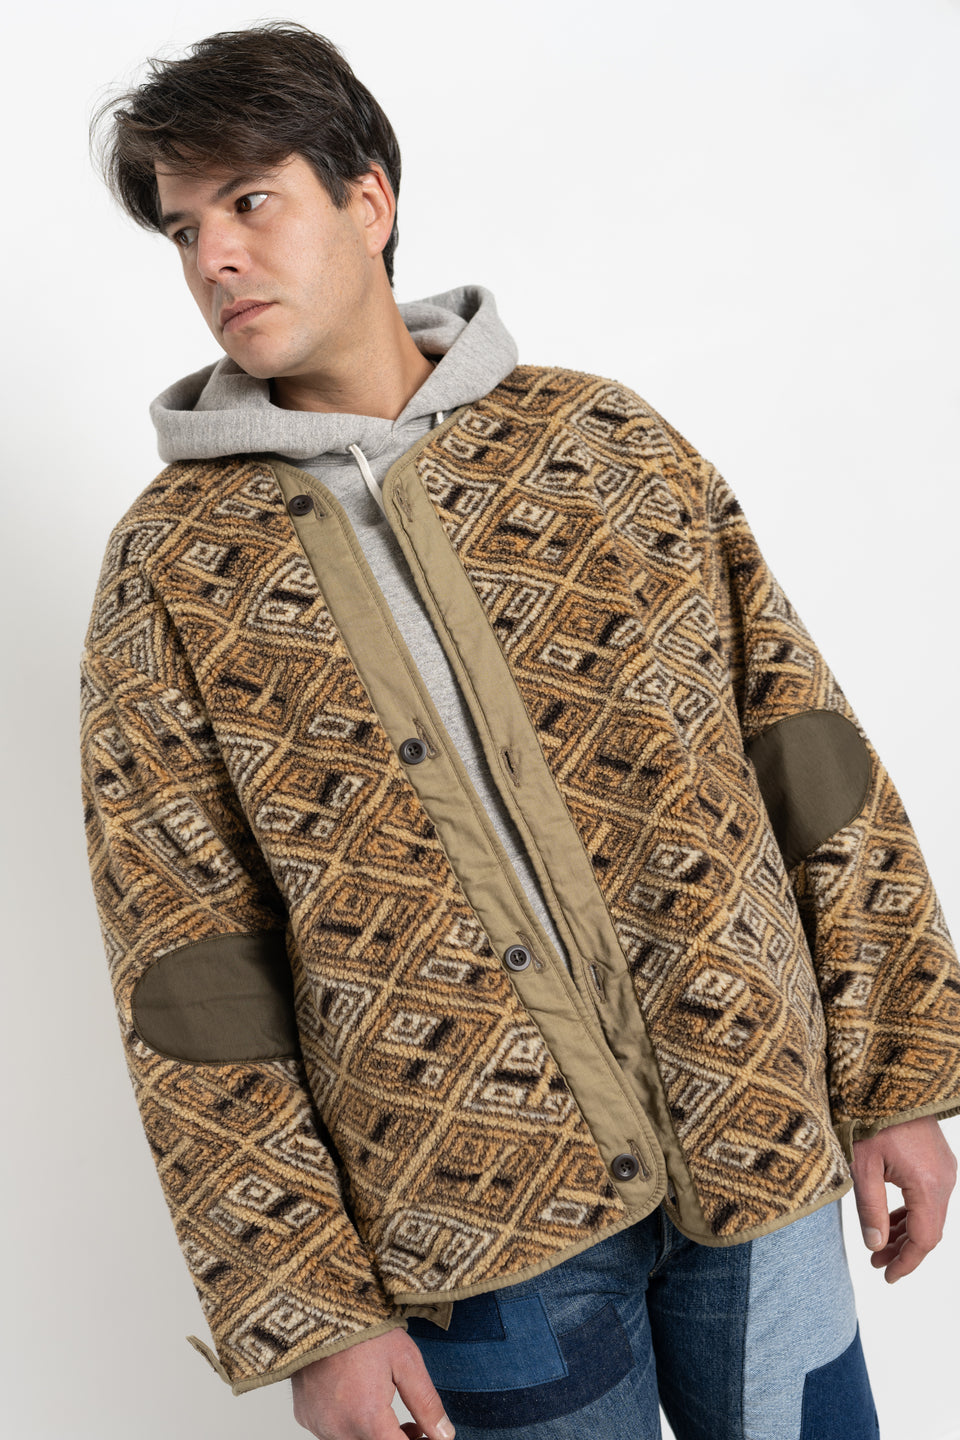 orSlow Japan 23AW FW23 Men's Collection African Pattern M-65 Fish Tail Coat Liner Jacket Calculus Victoria BC Canada